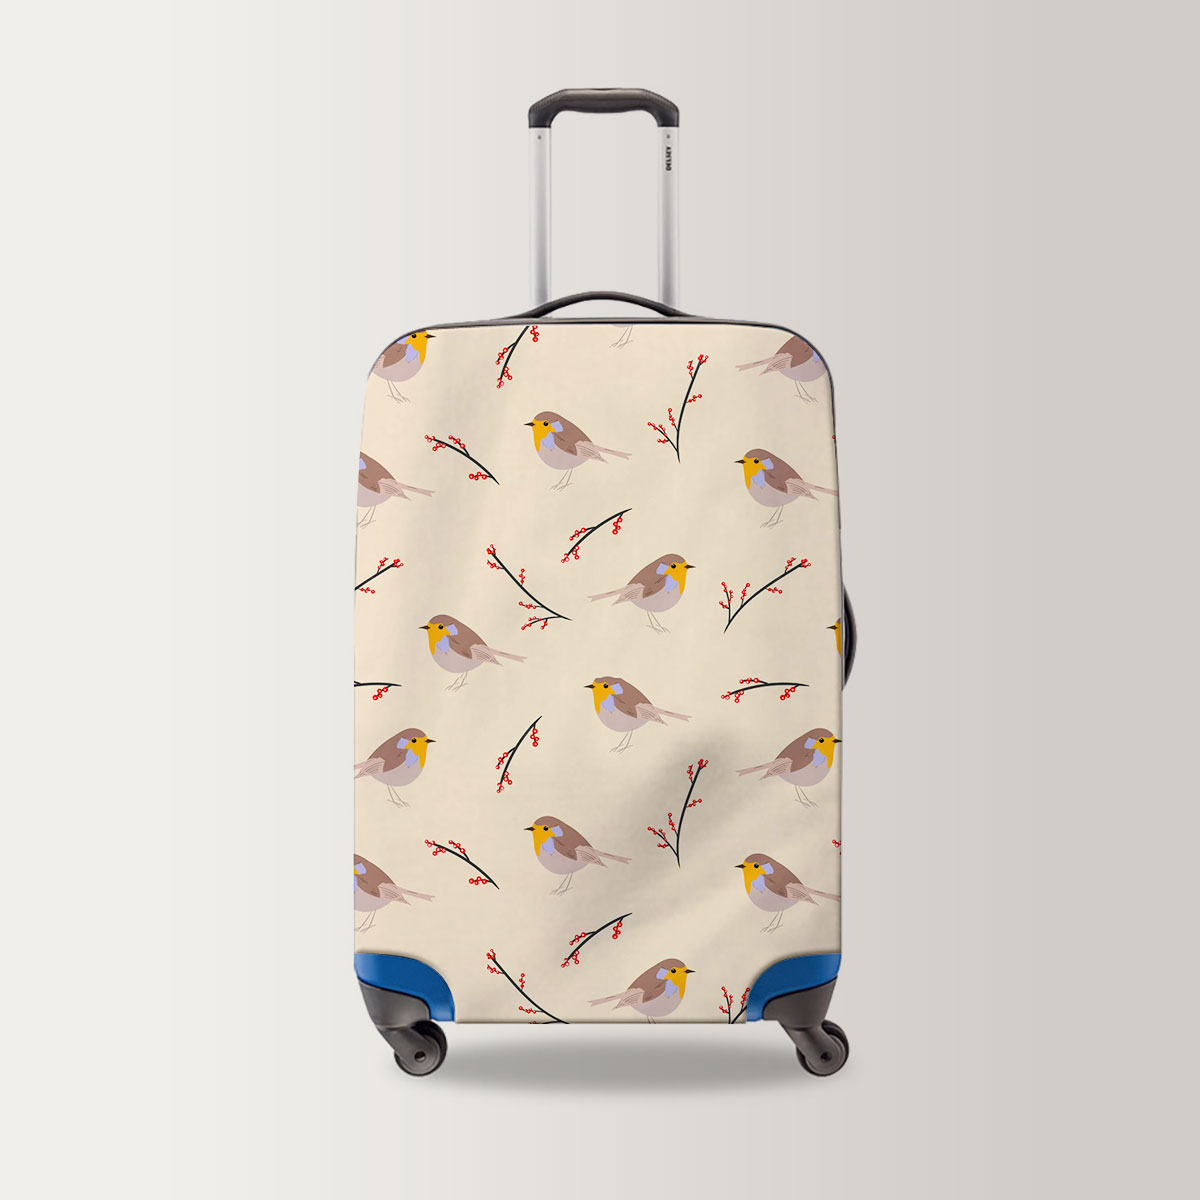 Coon Little Finch Luggage Bag